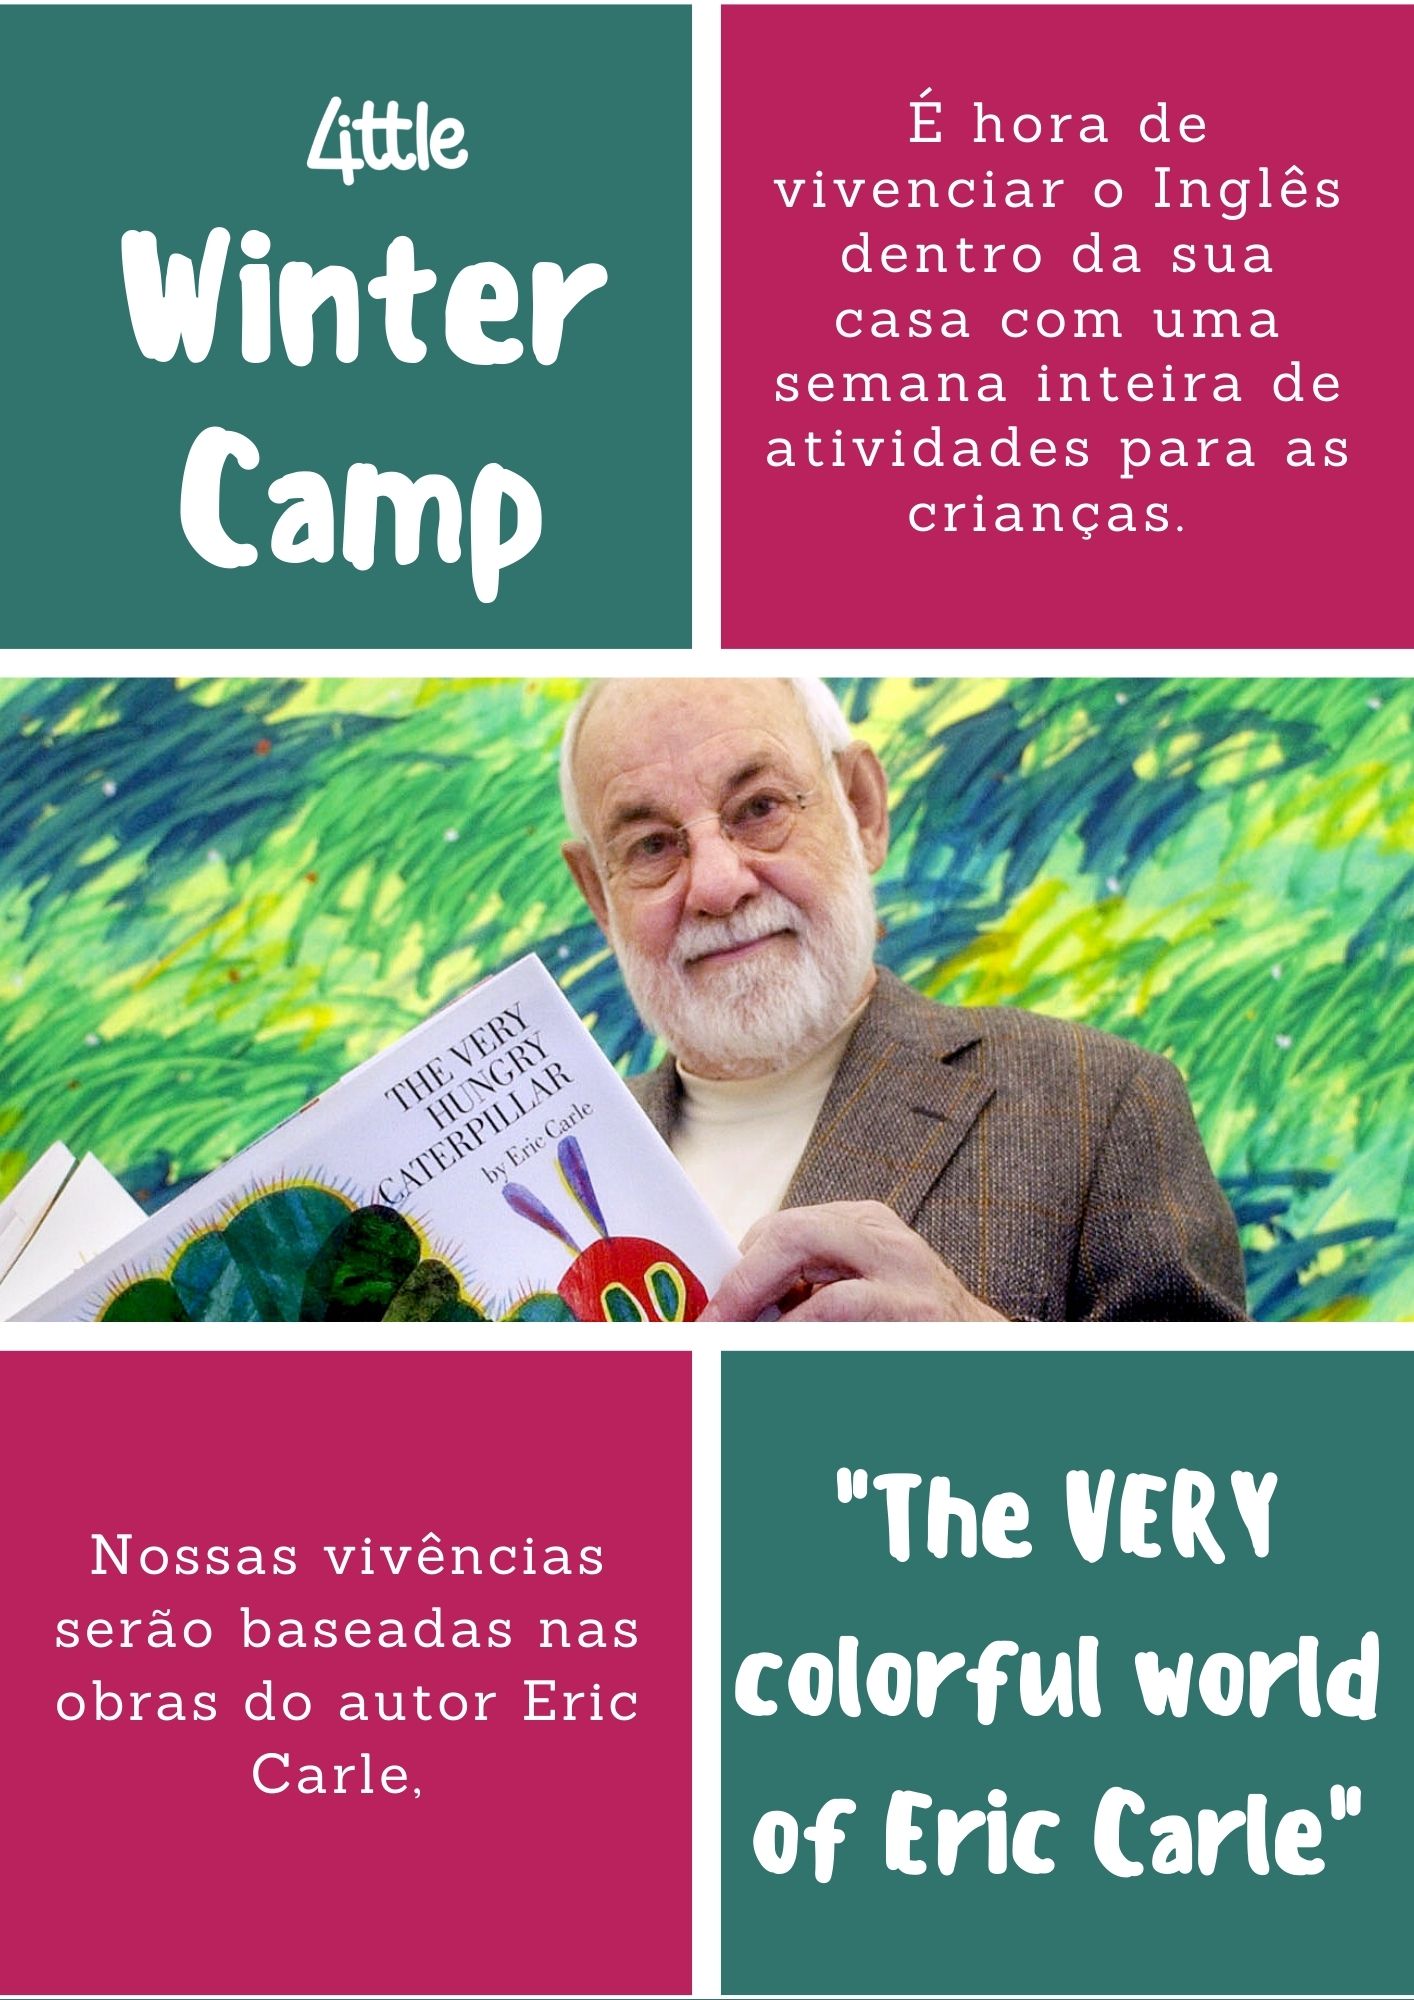 Winter Camp- July 2021- “The VERY colorful world of Eric Carle”